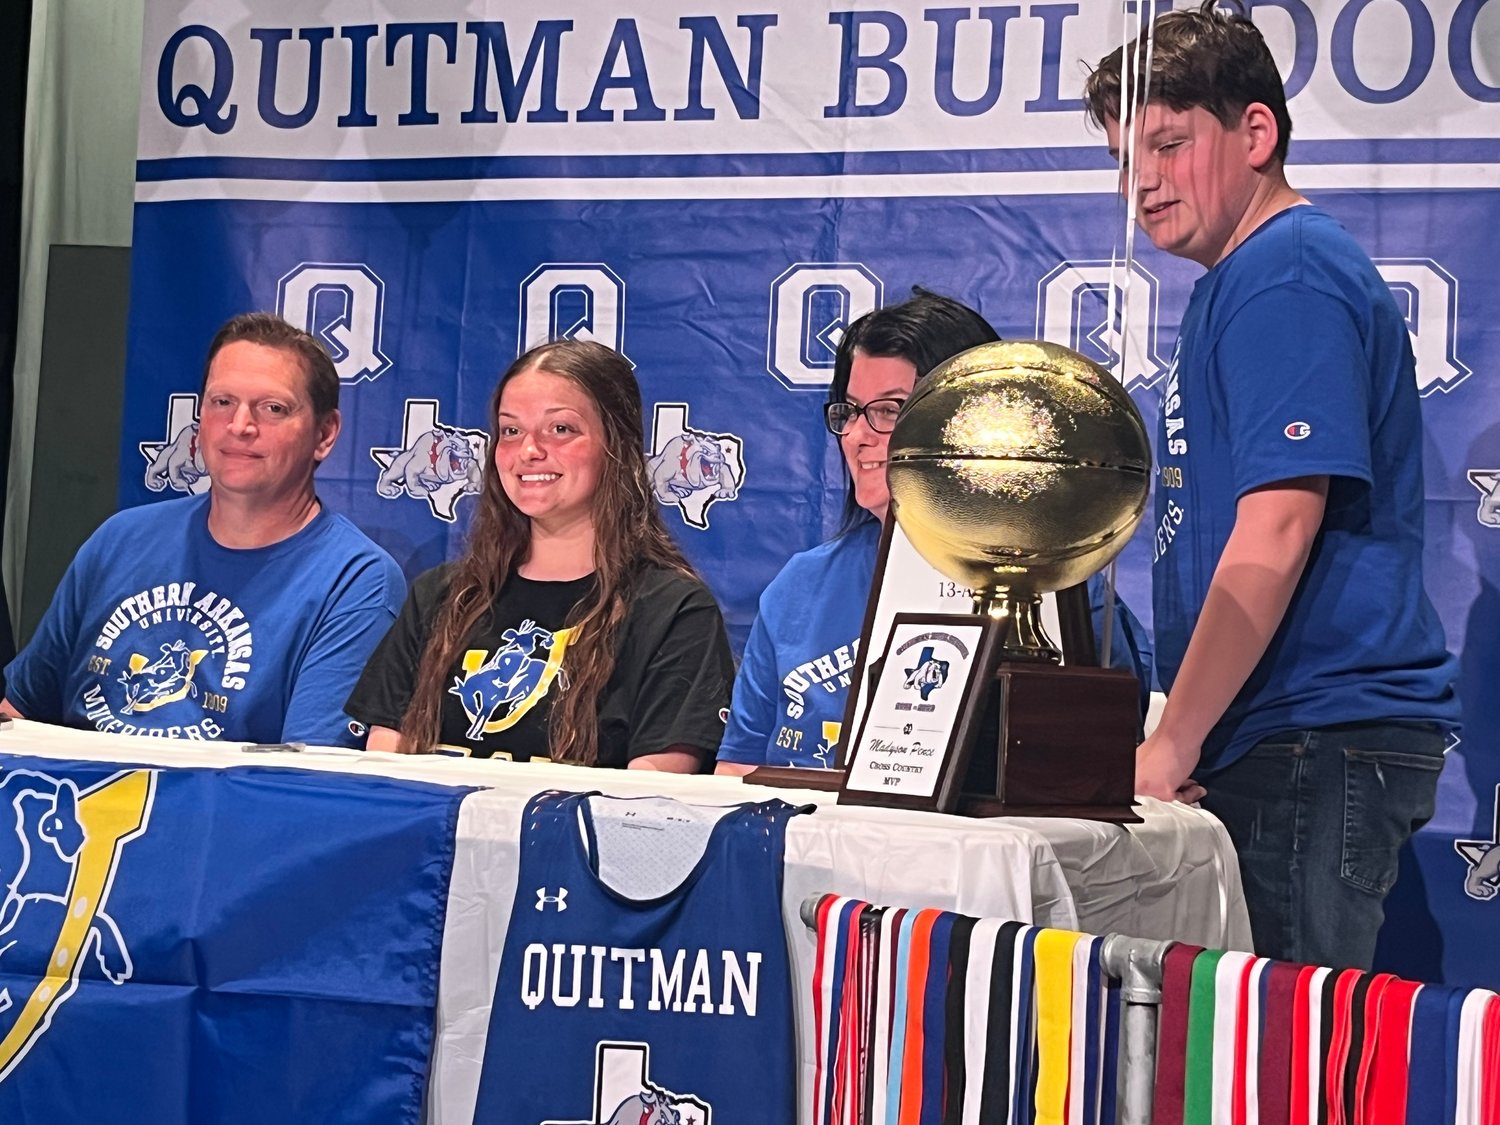 Quitman’s Maddy Pence signed a letter of intent last Thursday to attend Southern Arkansas University where she will run cross country and track. She is pictured with her family (from left) father Shannon Pence, Maddy, mother Mishea and brother Allen.

Pence also played varsity basketball, volleyball and softball during her four years at QHS. Cross Country Coach Mike Scott said Pence was “The foundation that helped build this program from just a few to over 30 girls who now are involved in cross country.”